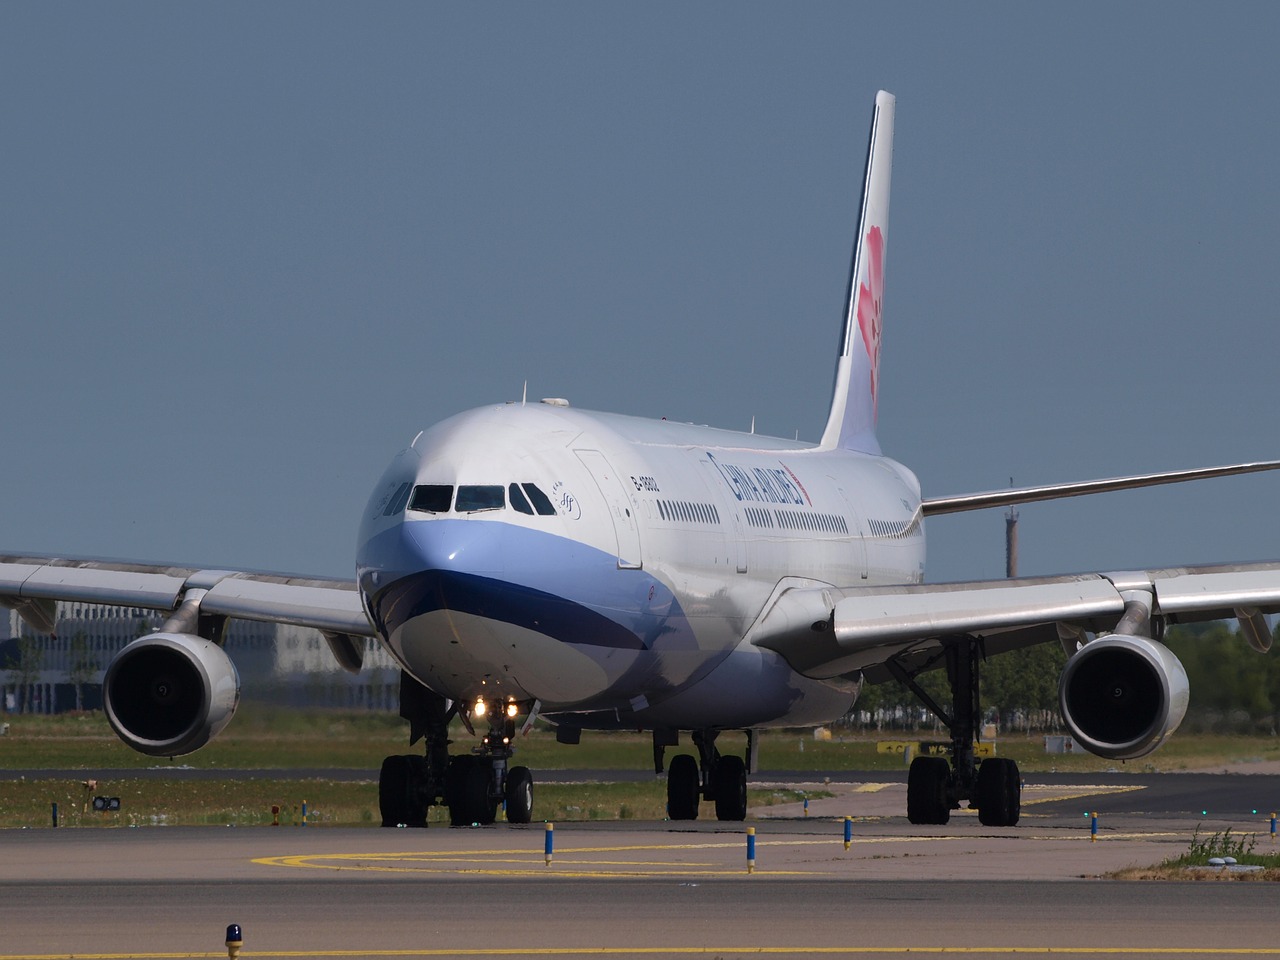 china airlines airbus a340 aircraft free photo